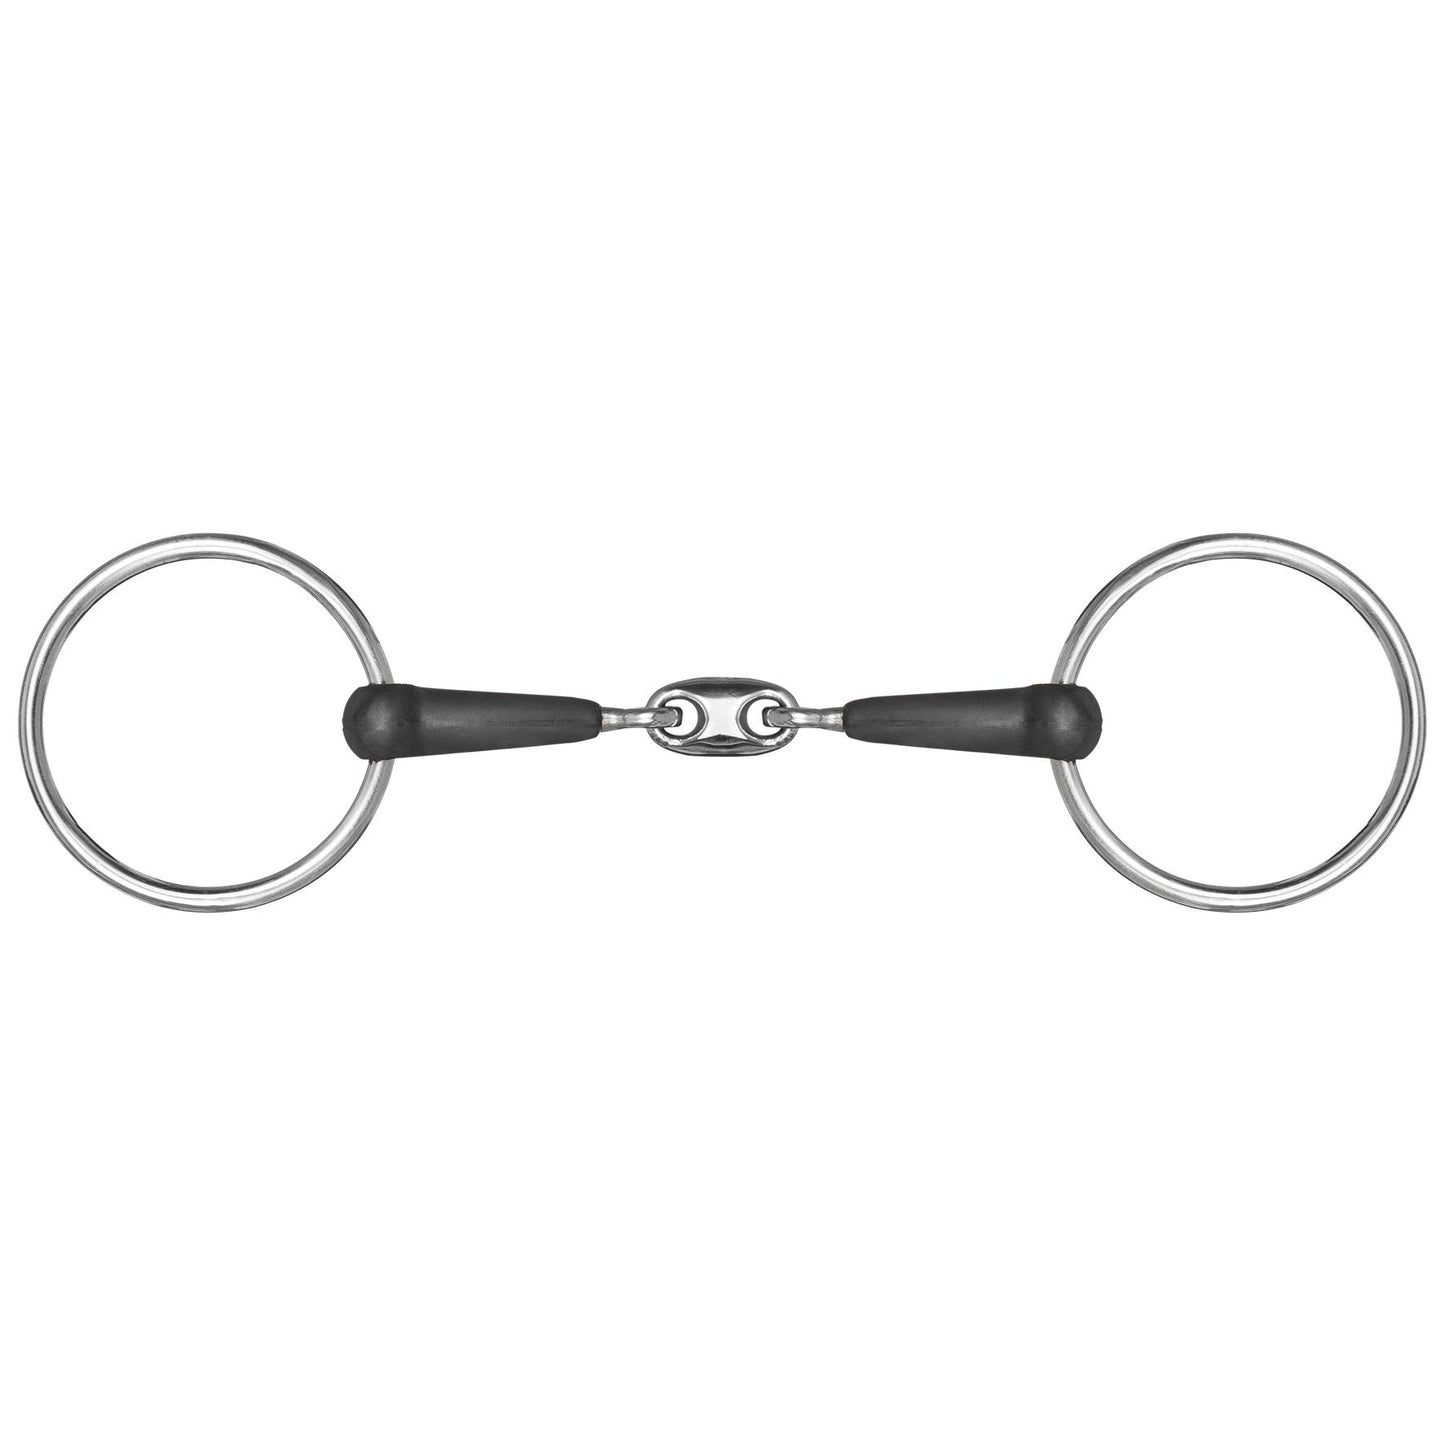 Double Jointed Rubber Loose Ring Snaffle